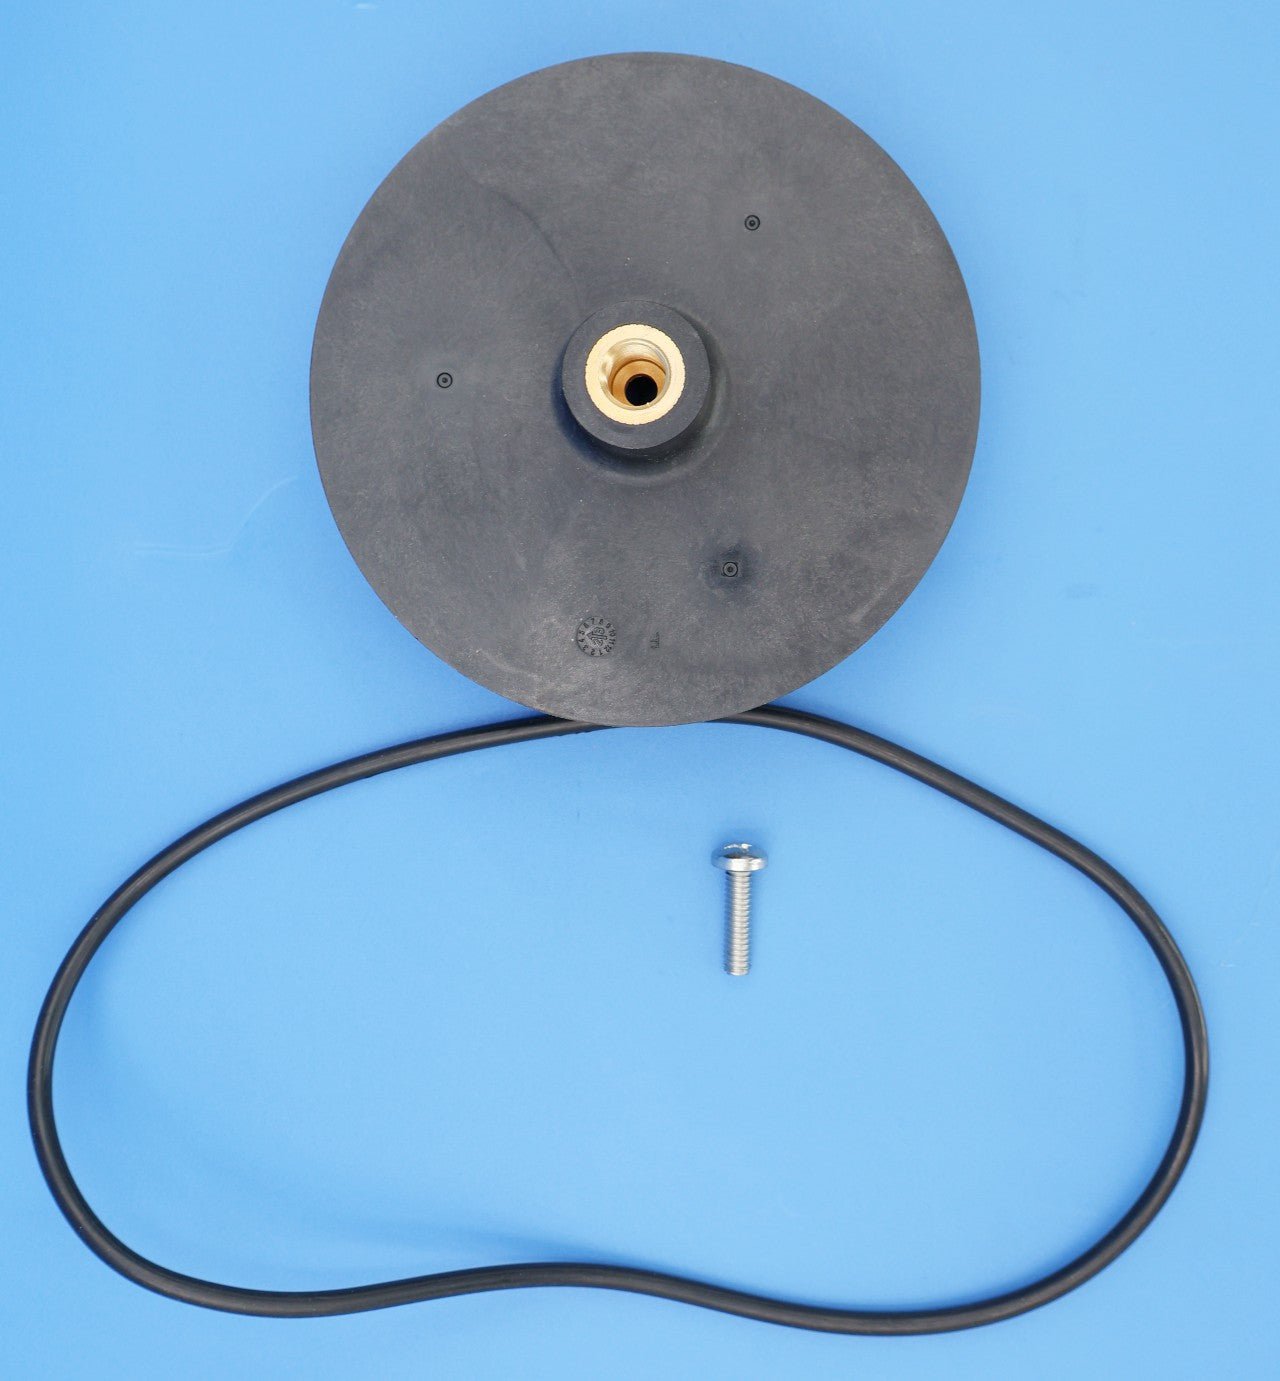 Jandy Impeller Replacement for VSFHP270DV2A R0808300 - Pool Pump Parts - img-4